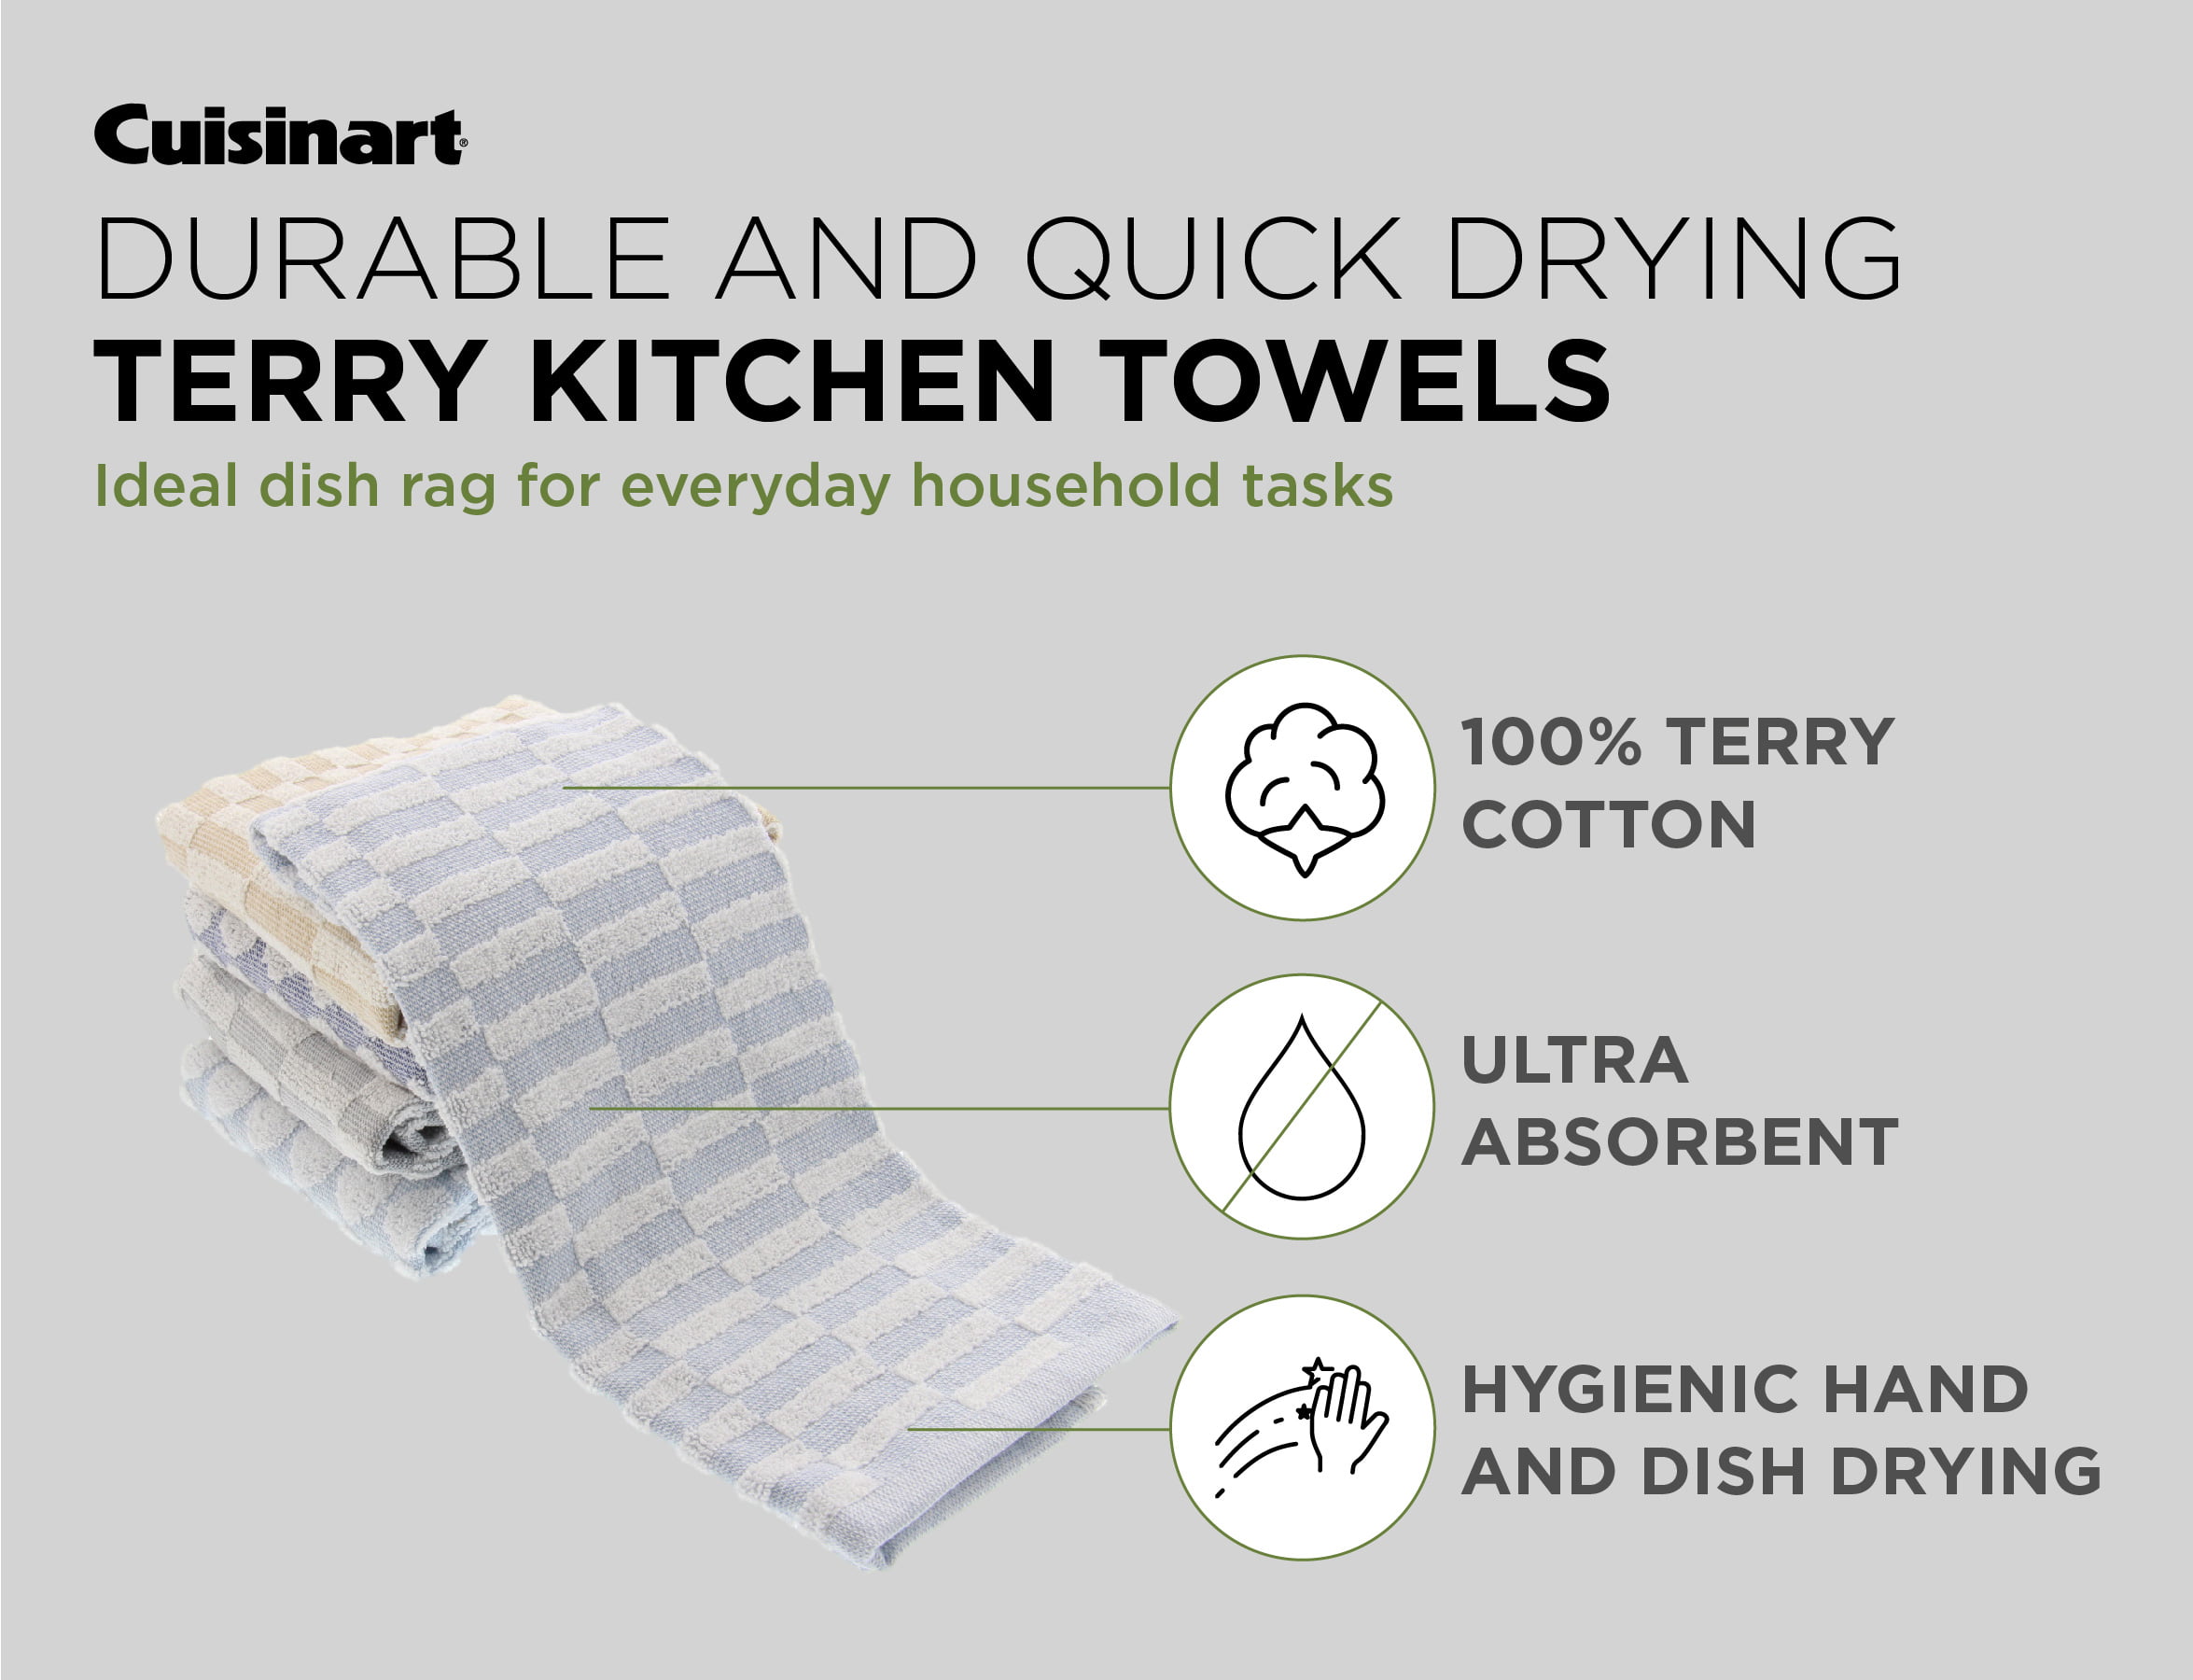 Cuisinart Bamboo Dish Towel Set-Kitchen and Hand Towels for Drying Dishes/Hands - Absorbent, Soft and Anti-Microbial-Premium Bamboo/Cotton Blend, 2